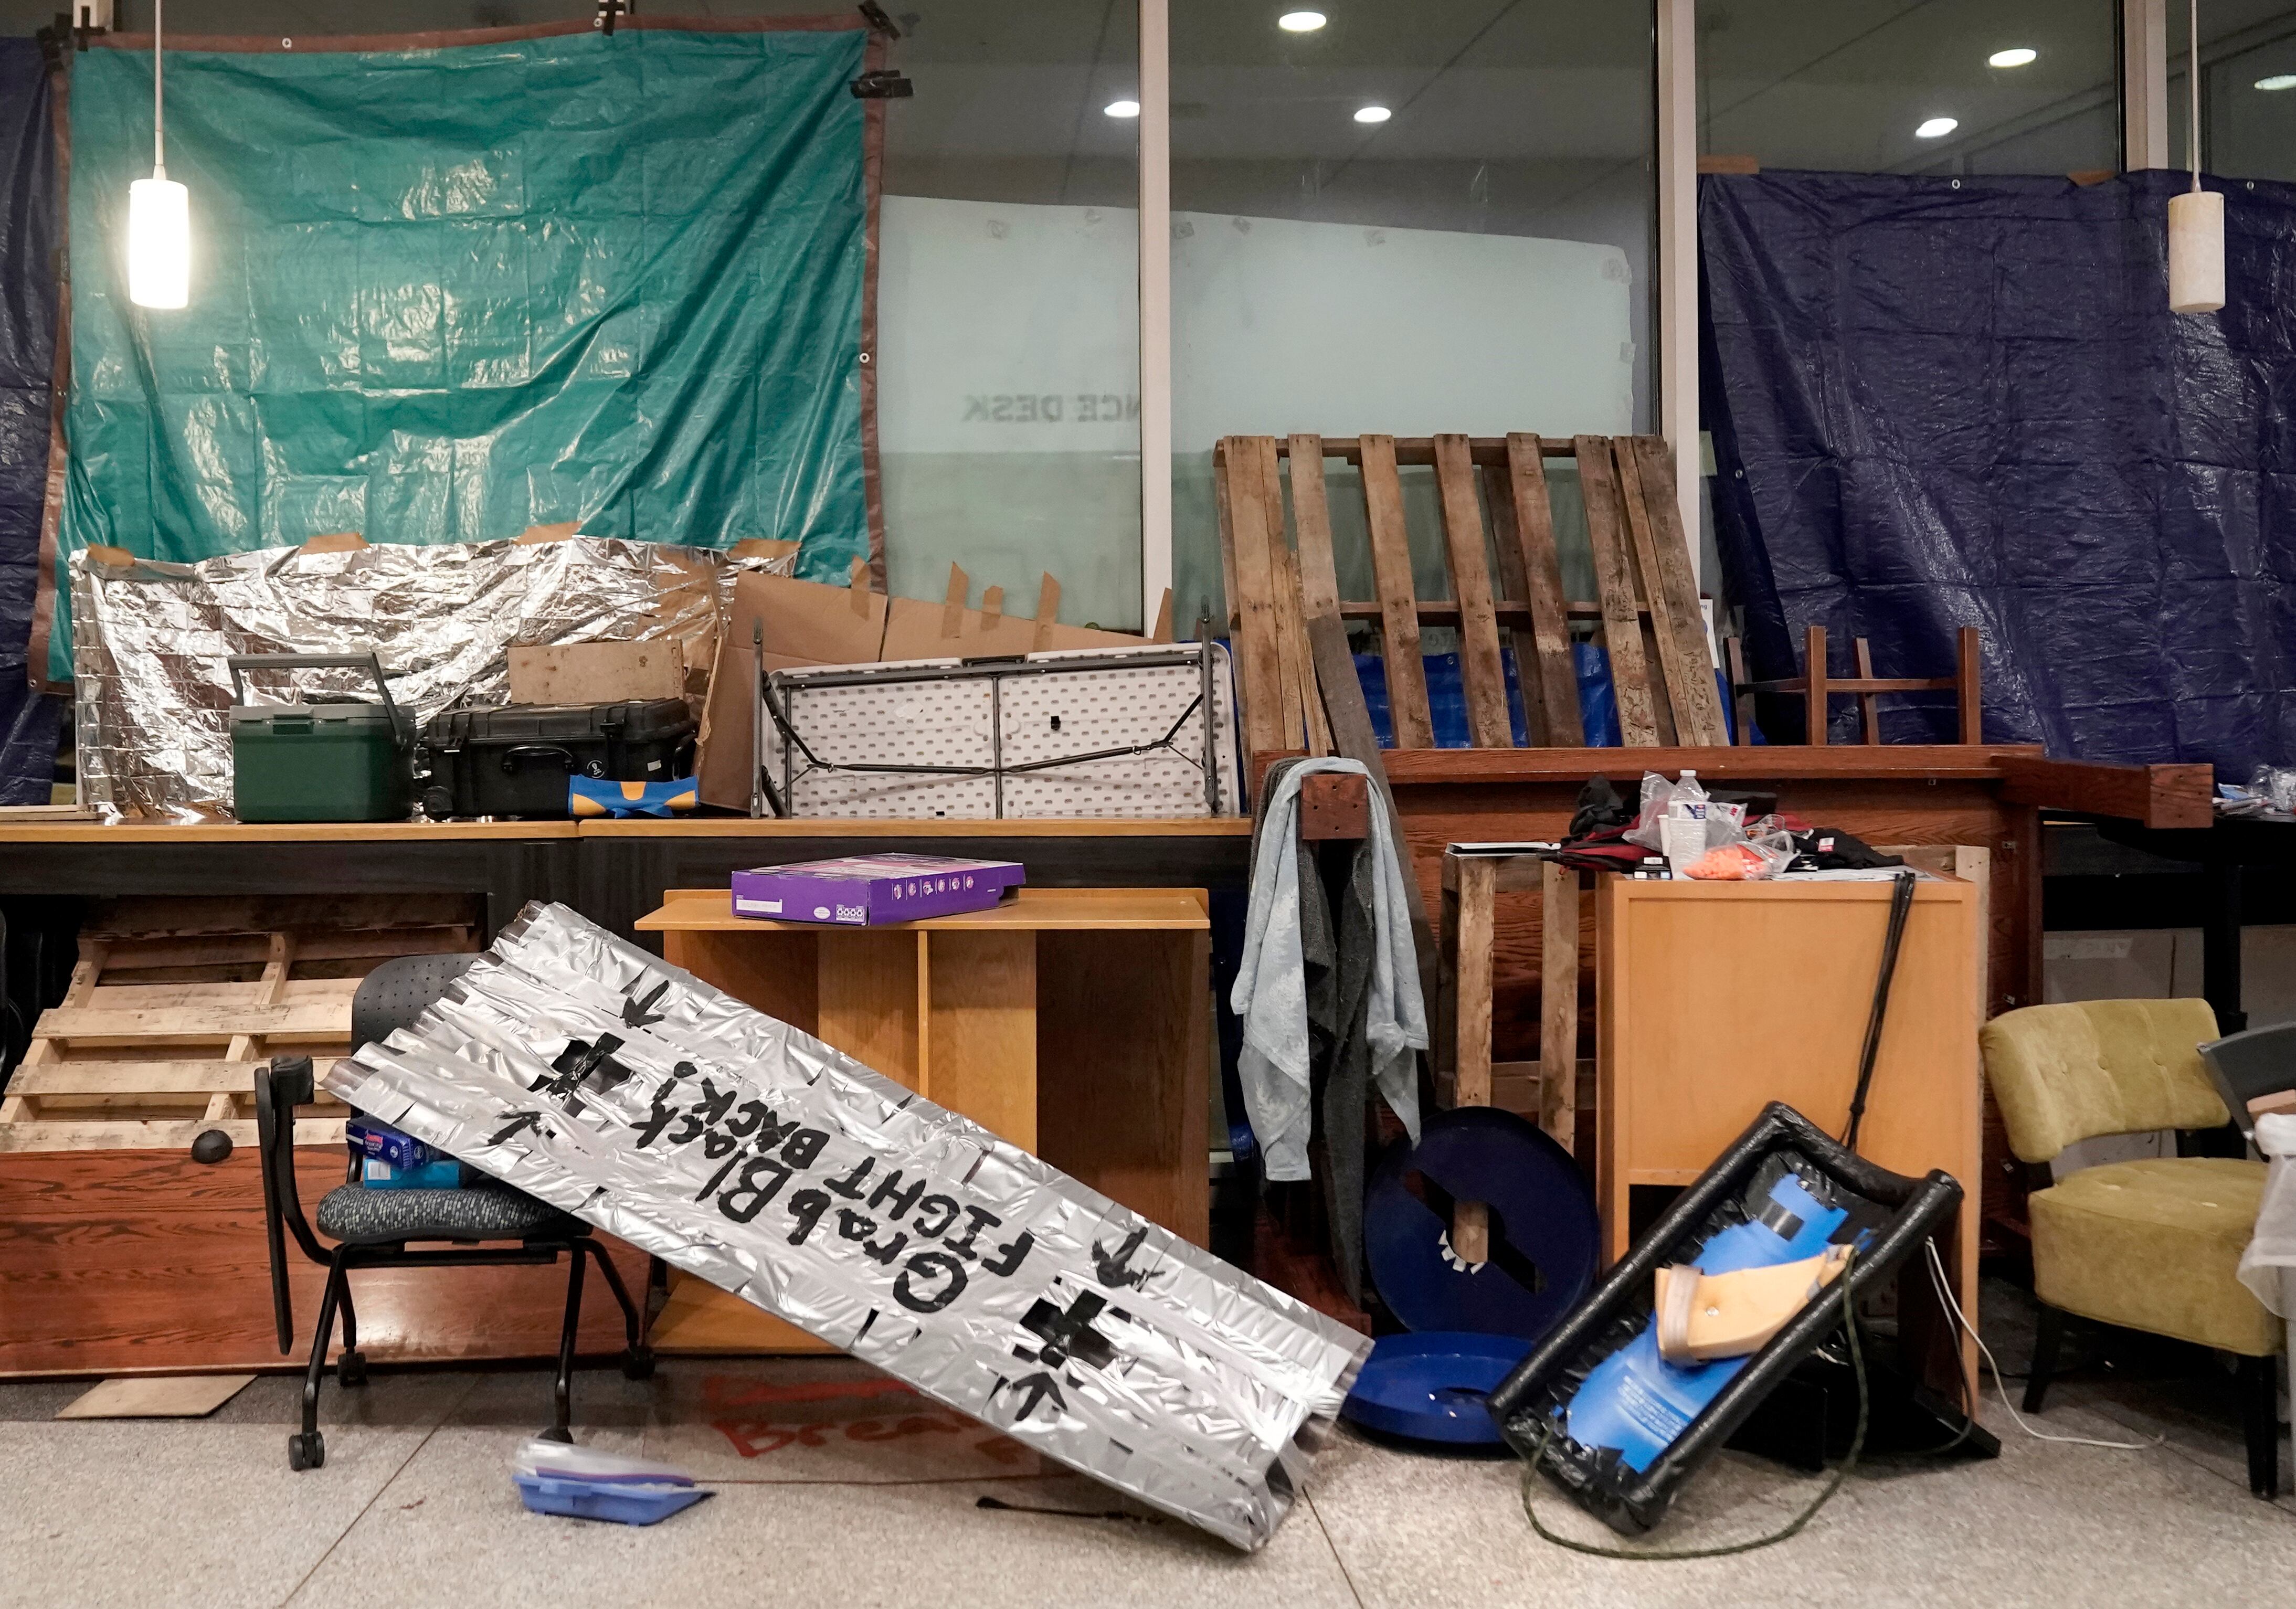 Defense items and barricades on the first floor, near the main entrance of the library.